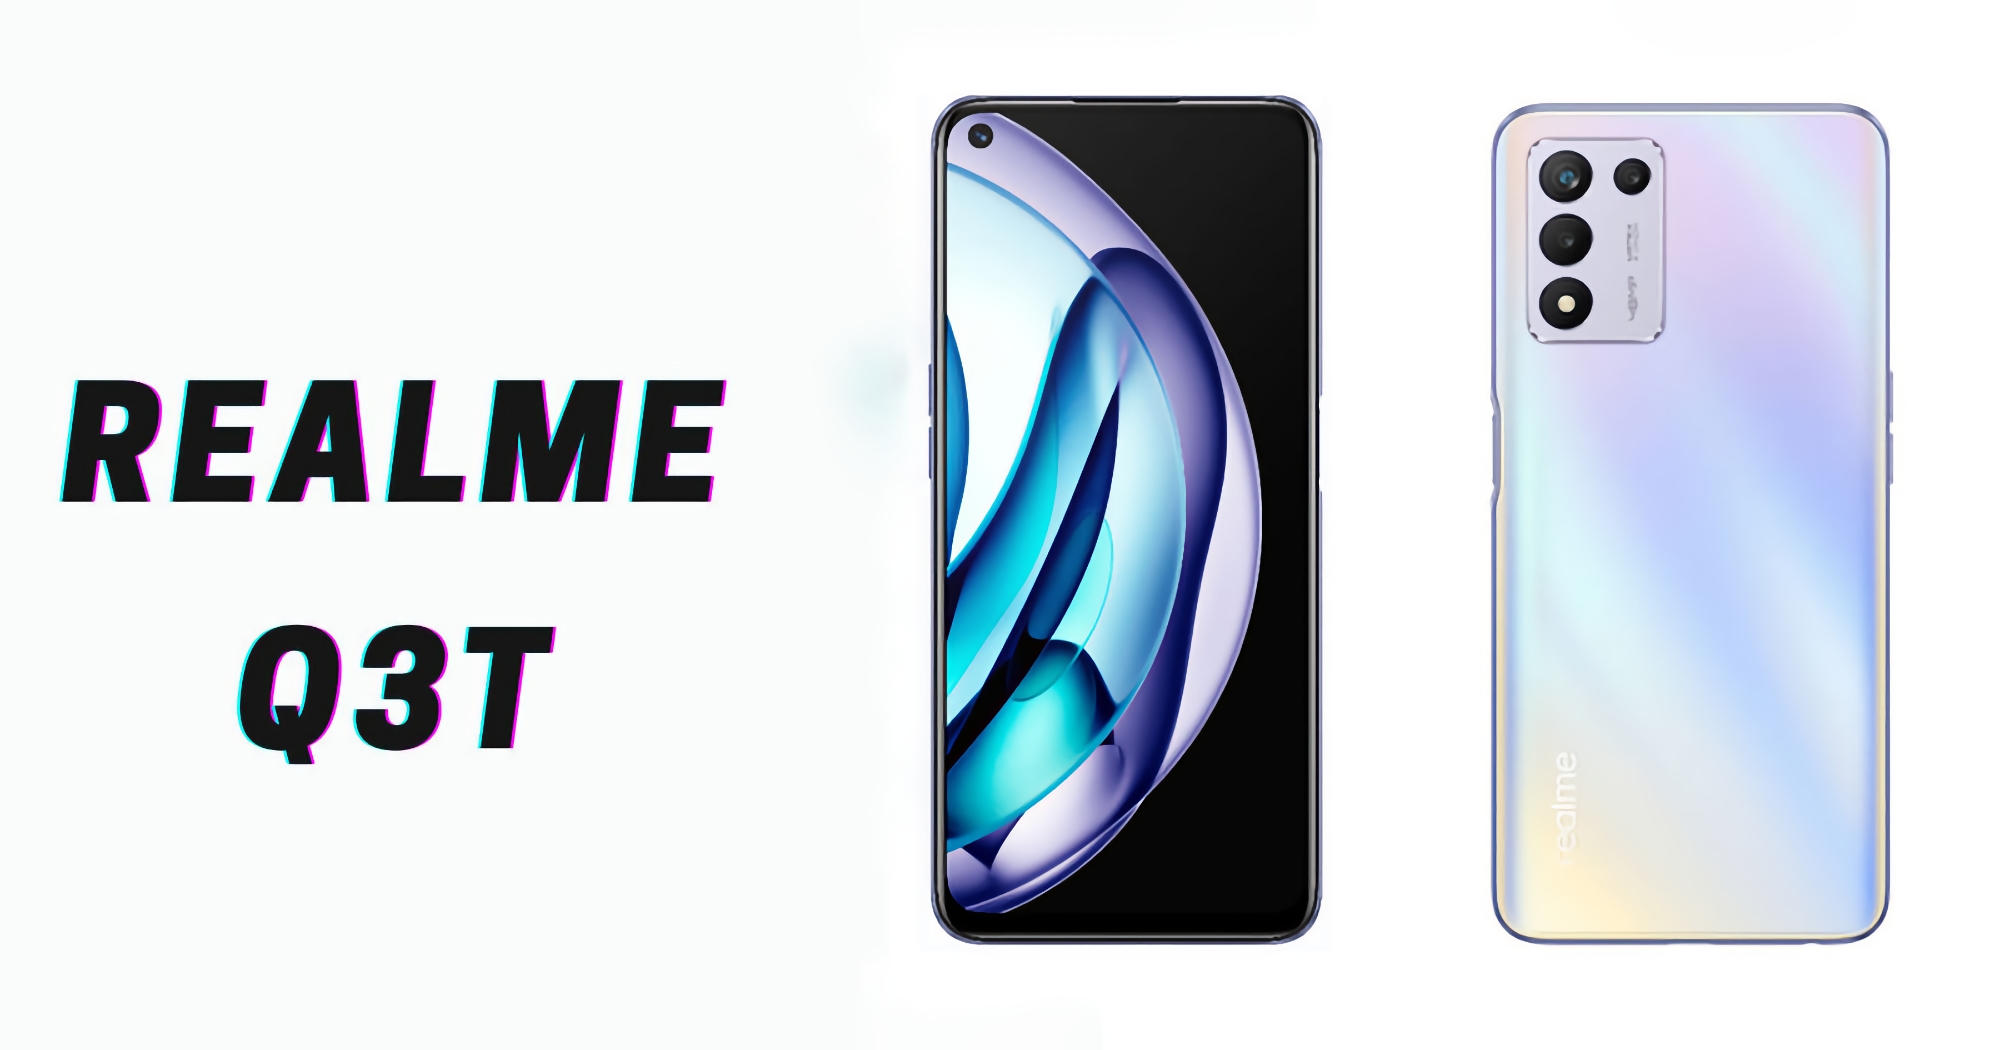 The network leaked characteristics, images and price of a new budget smartphone Realme Q3T